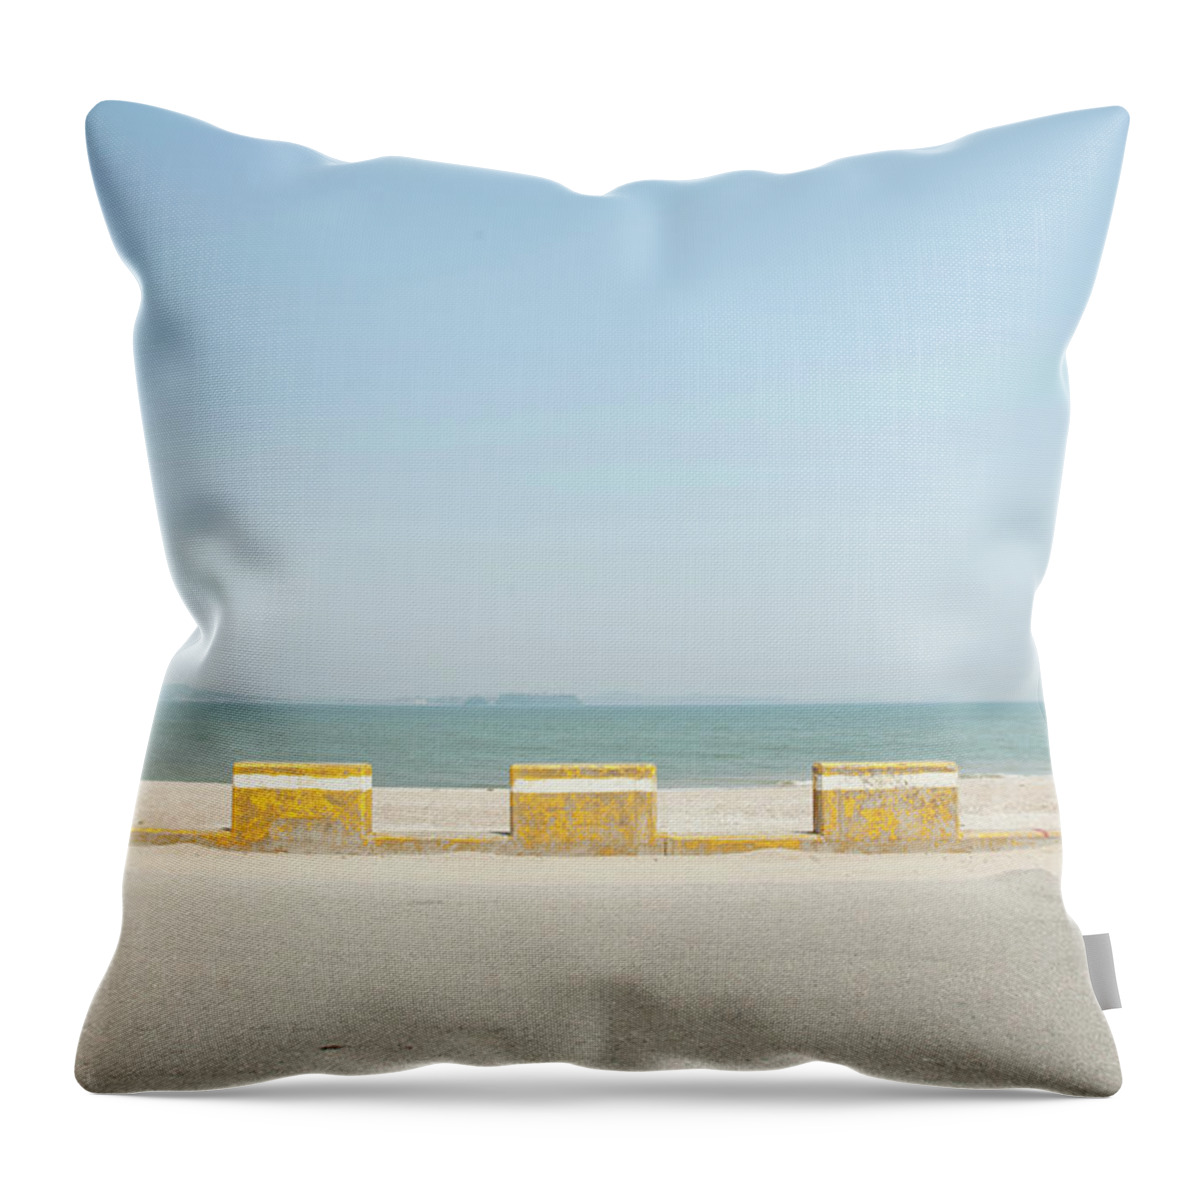 Tranquility Throw Pillow featuring the photograph Roadside Barriers by Photo By Dylan Goldby At Welkinlight Photography